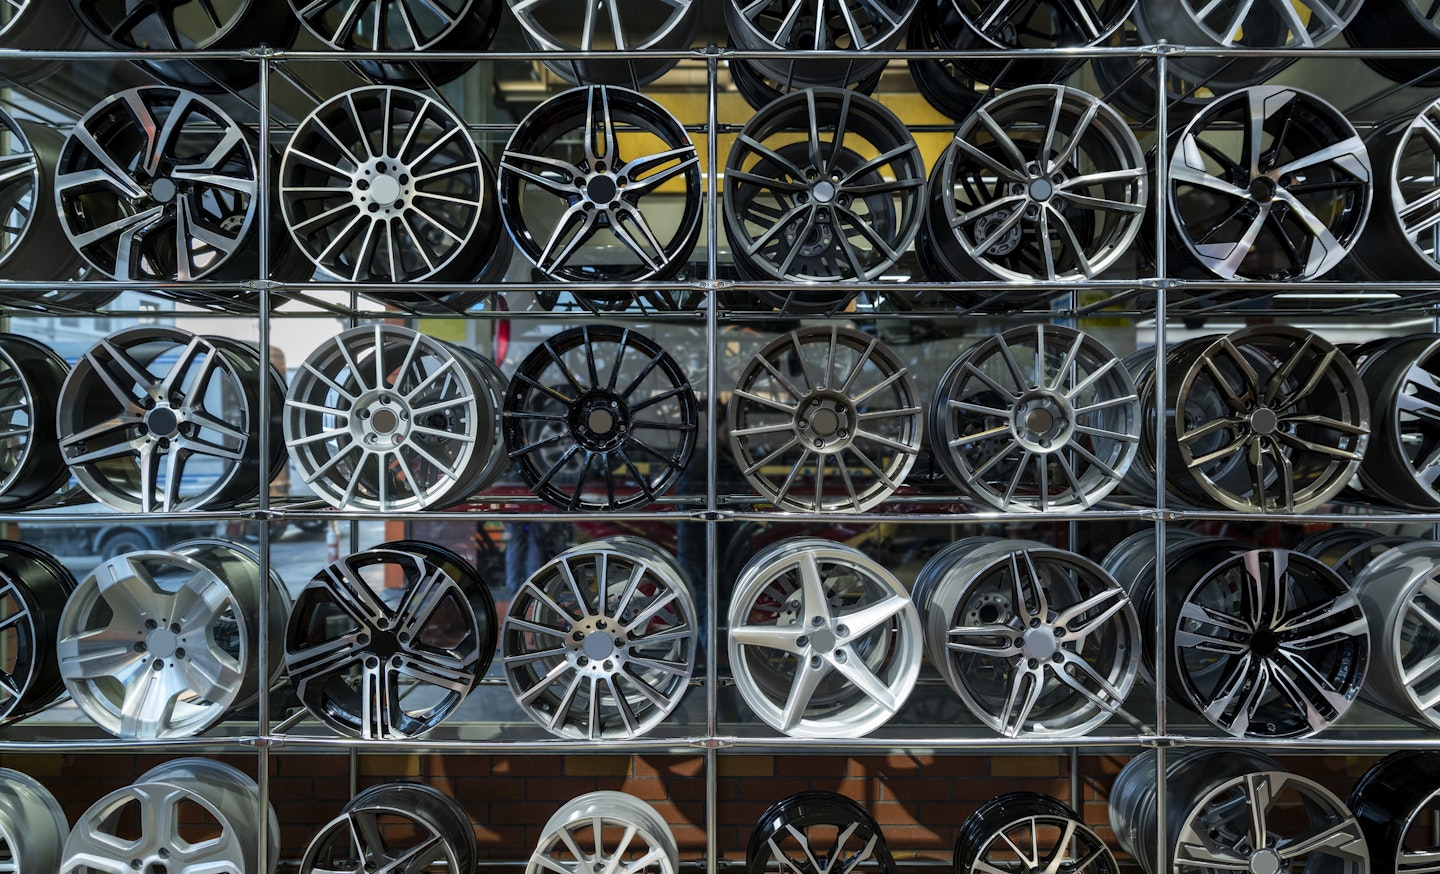 A selection of car rims on display